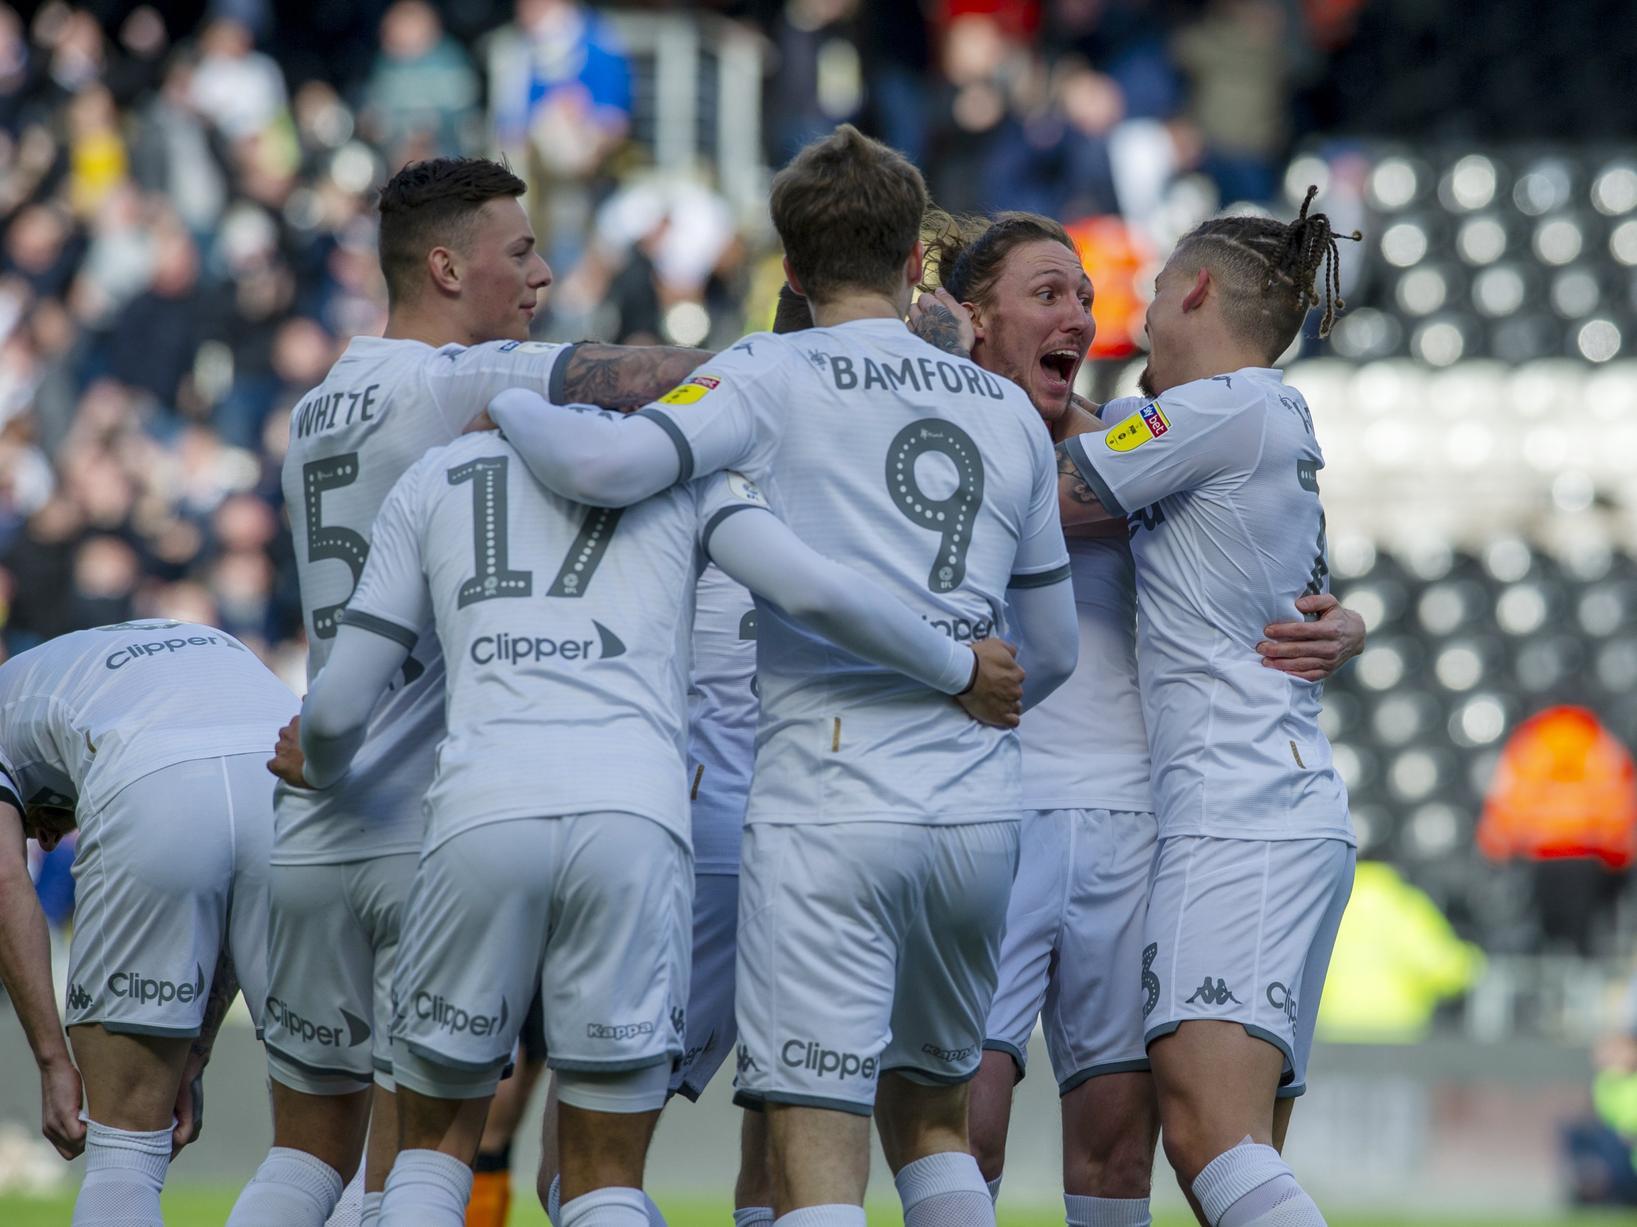 Leeds United secured a mega 4-0 win at Hull City on Saturday afternoon.